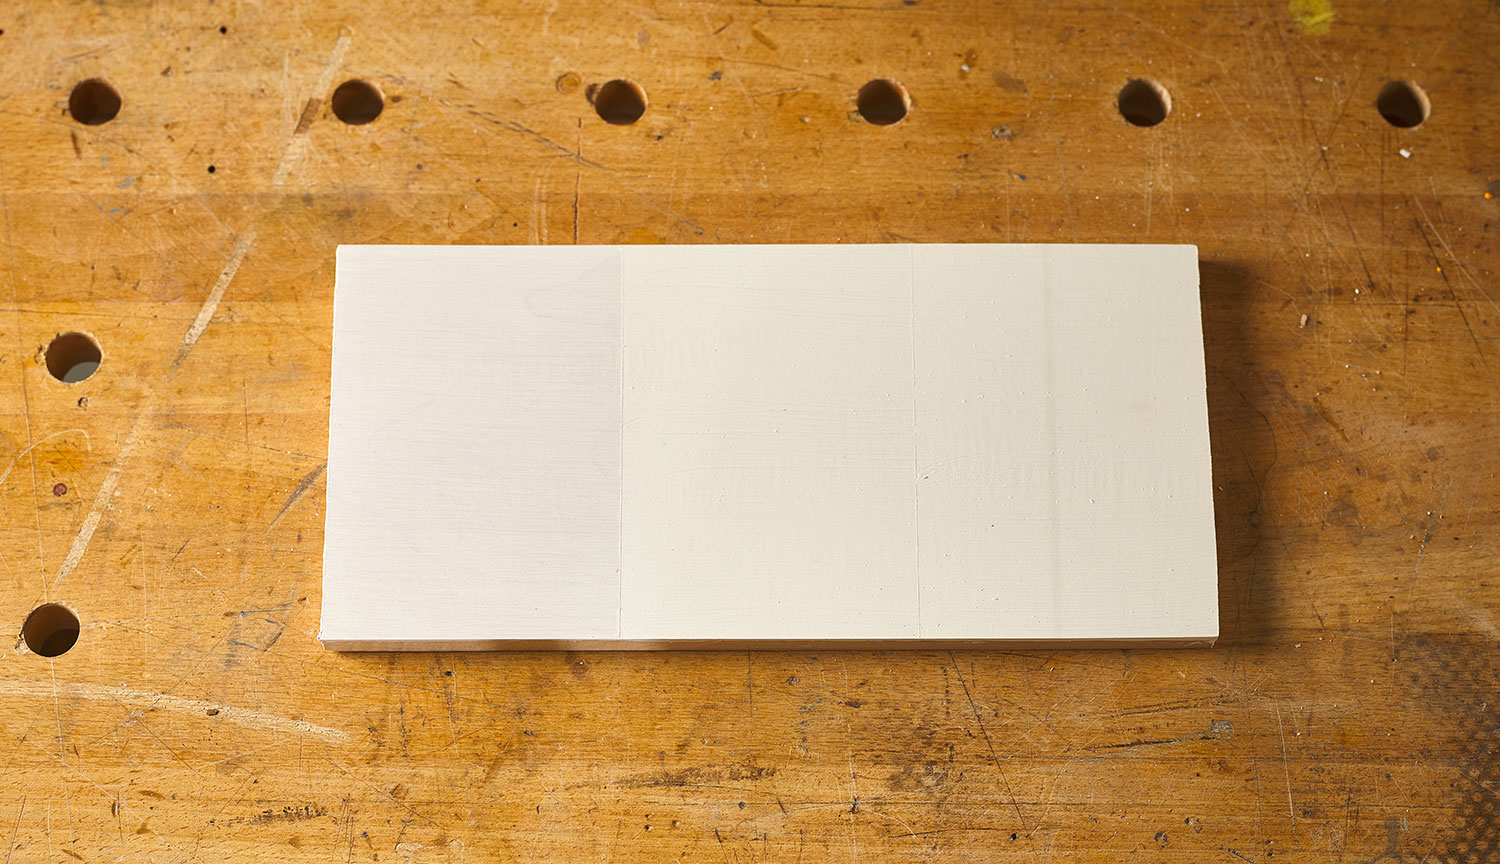 Sample board with one, two and three coats of antique white paint